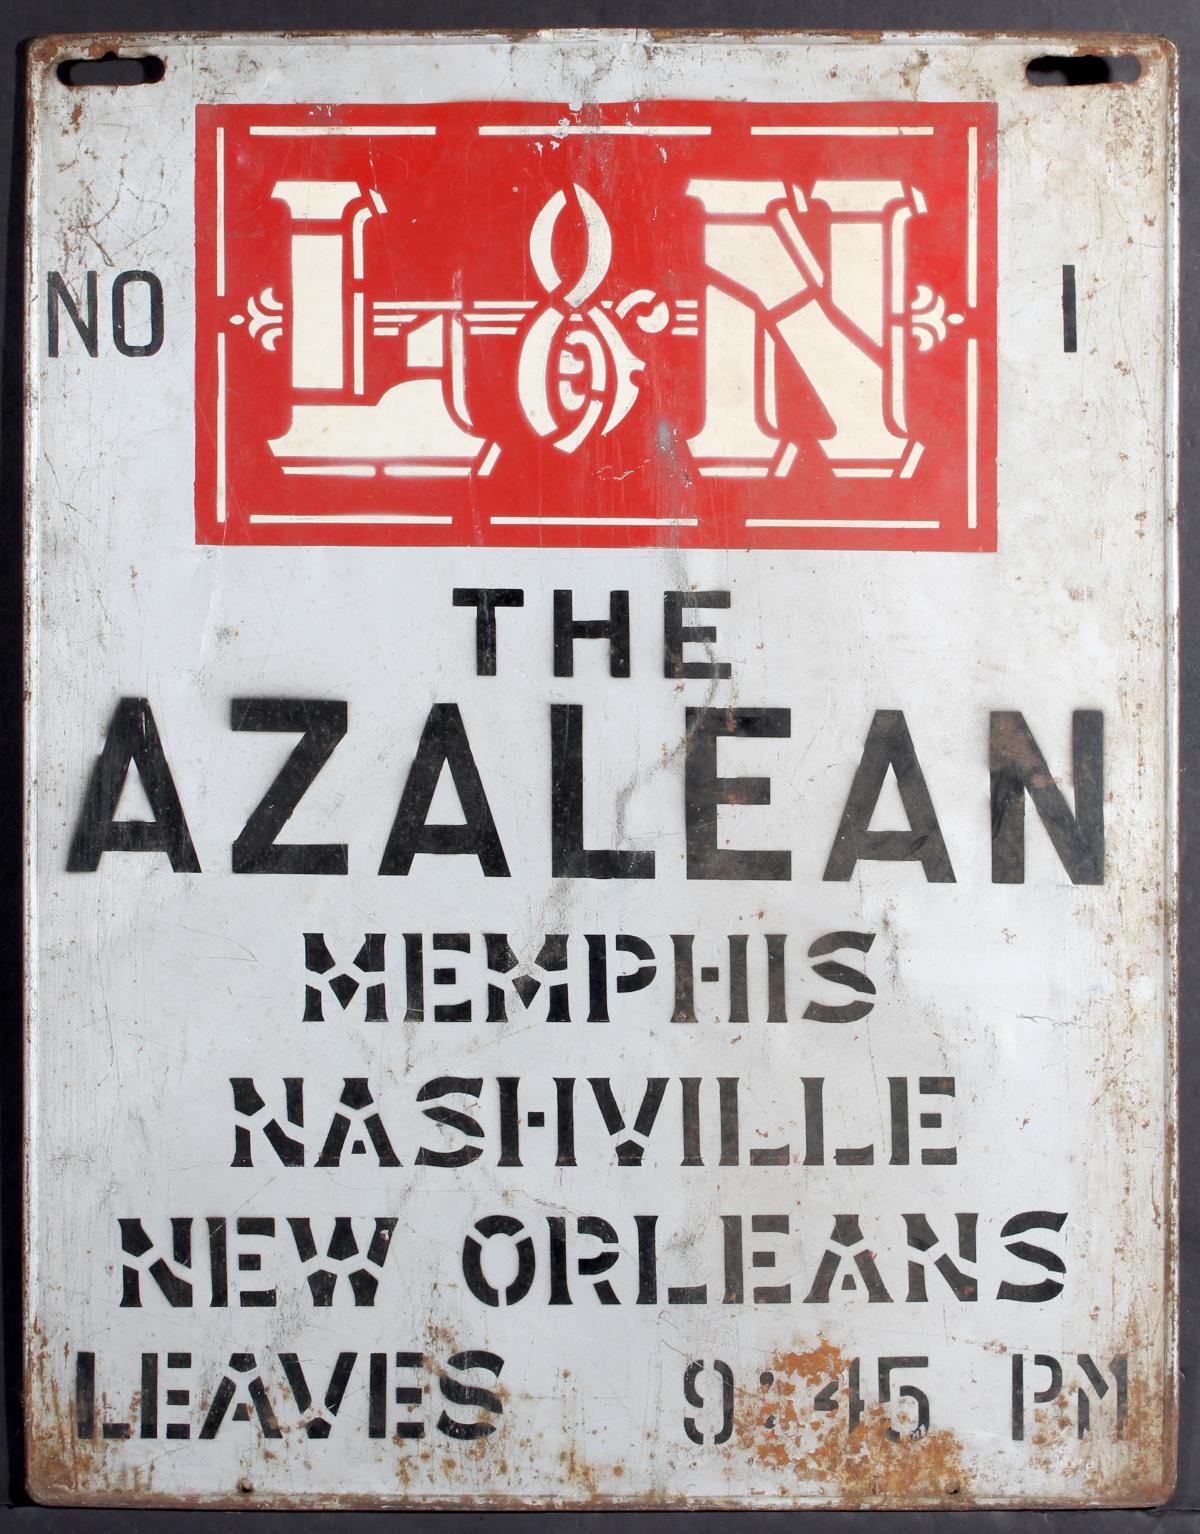 A LOUISVILLE AND NASHVILLE GATE SIGN FOR THE AZALEAN